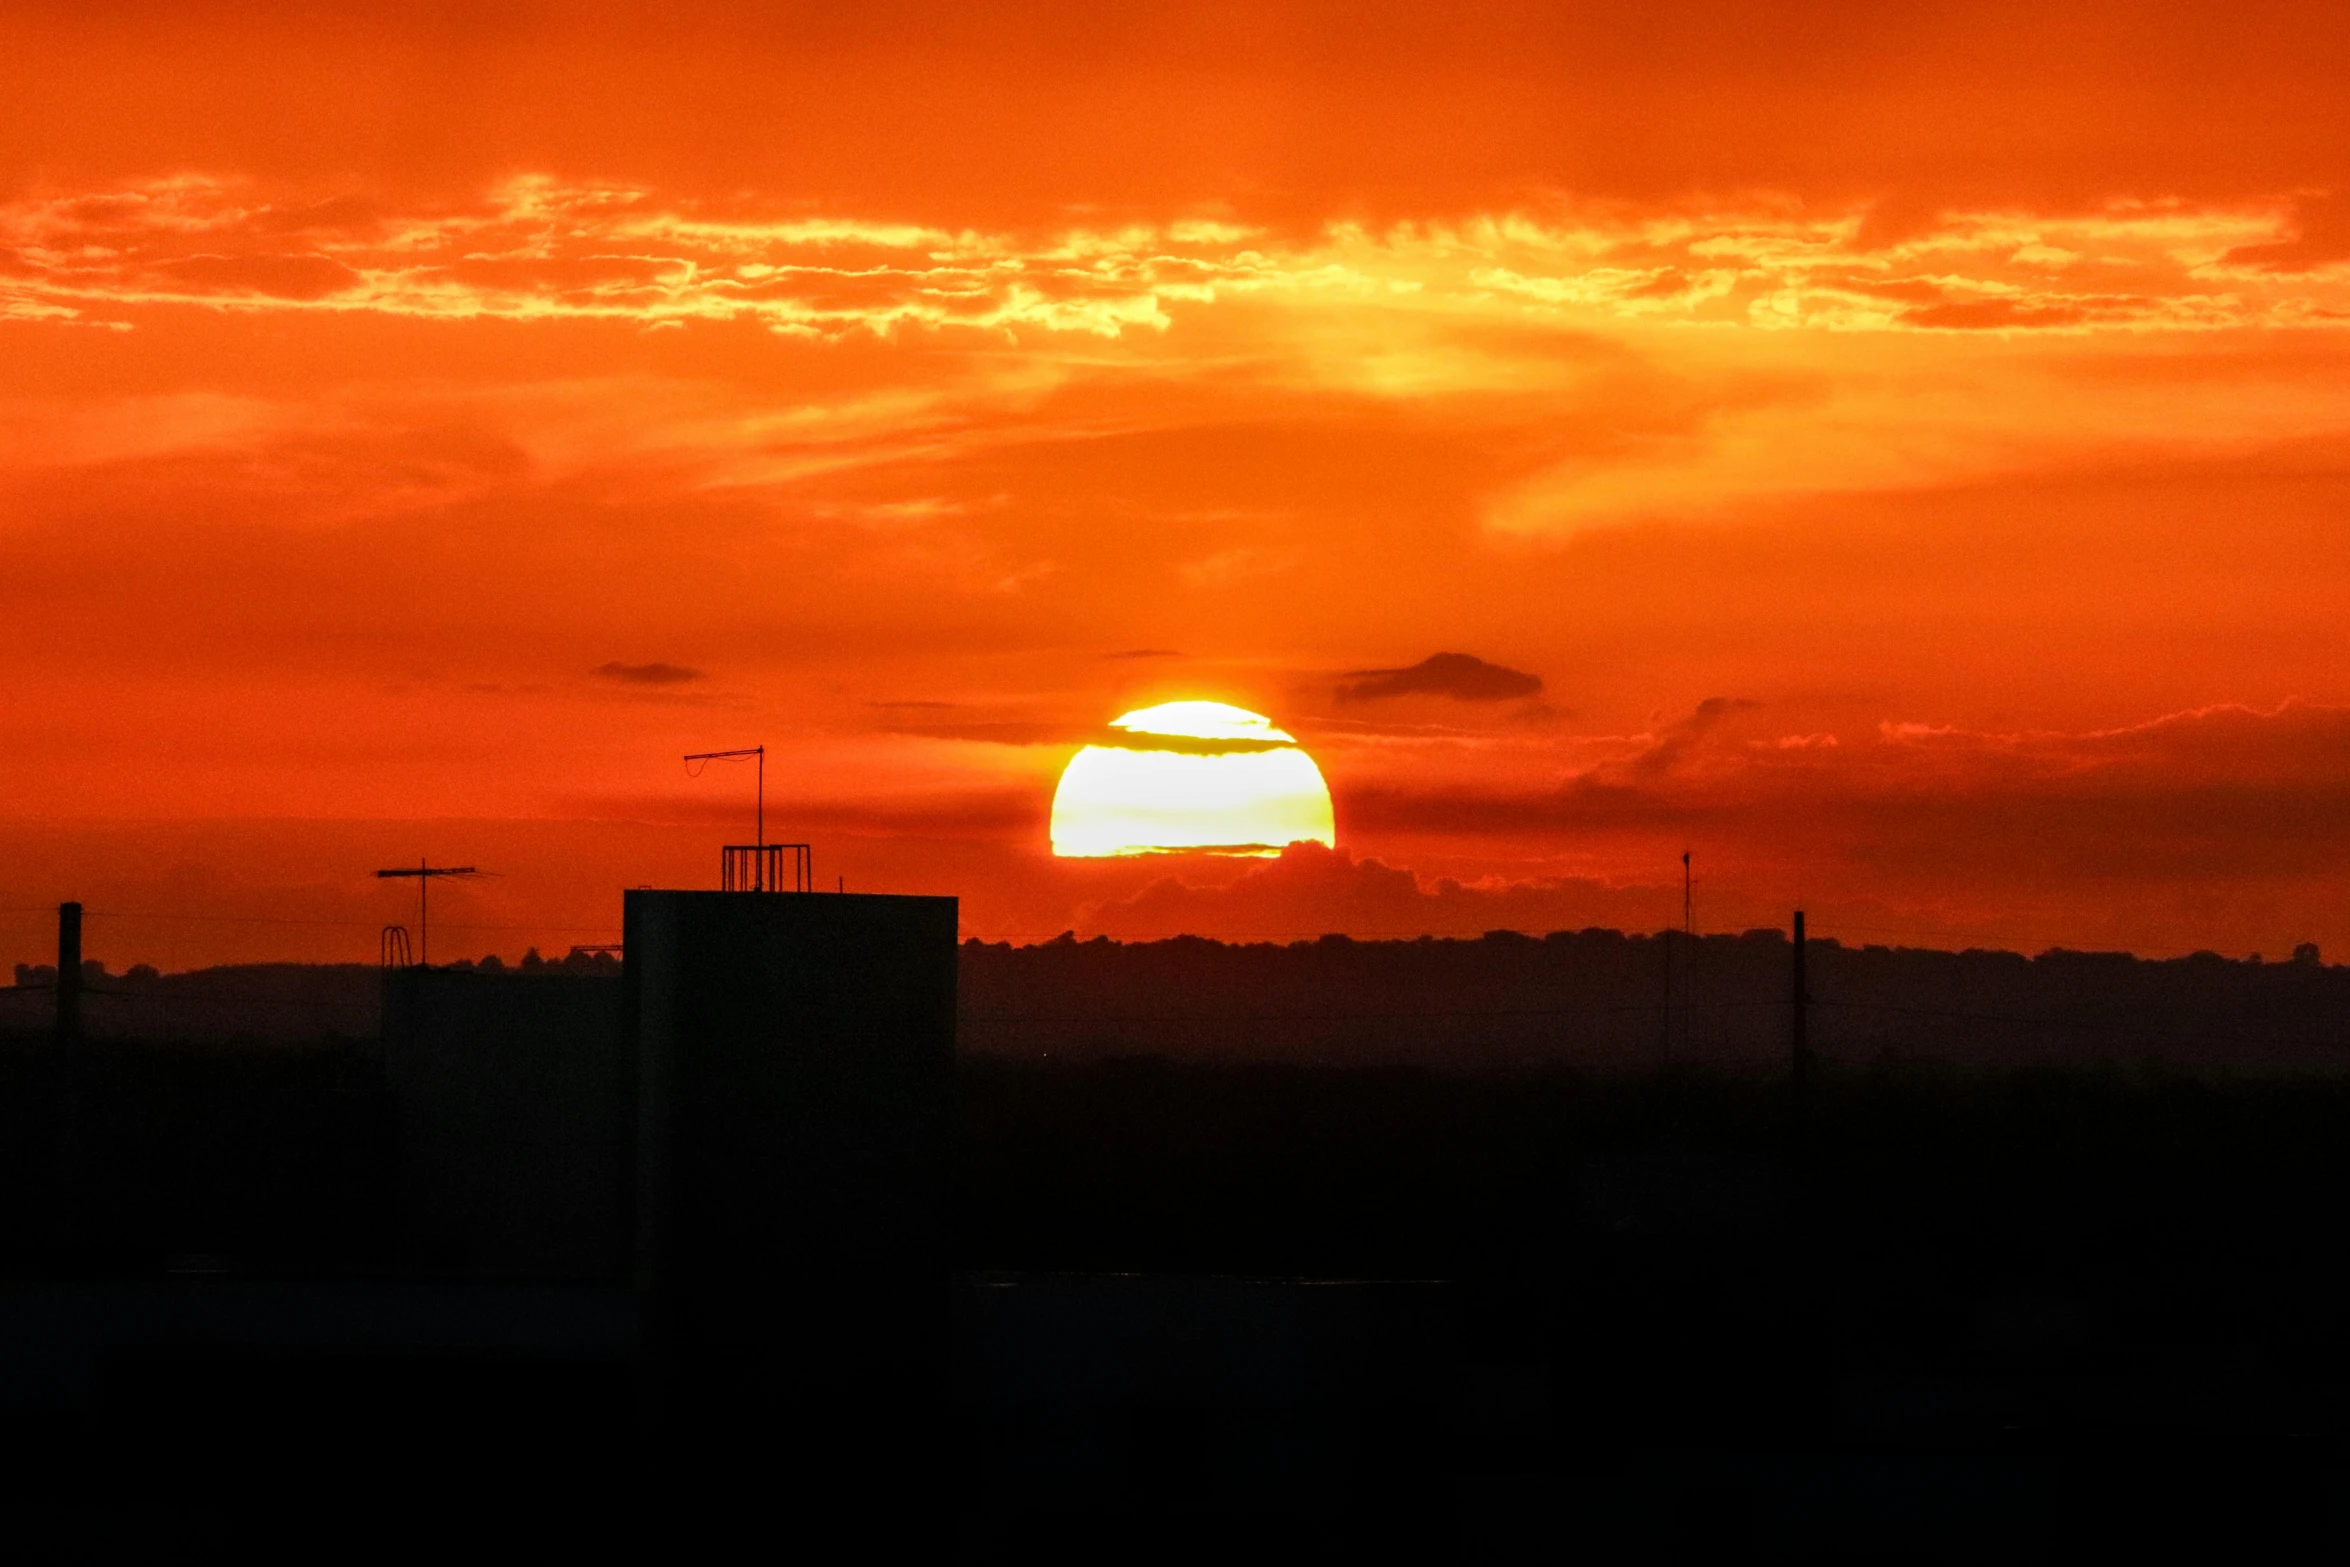 the sun is setting over the city skyline, a picture, by Ian Fairweather, happening, digital yellow red sun, ((sunset)), solar, orange sun set